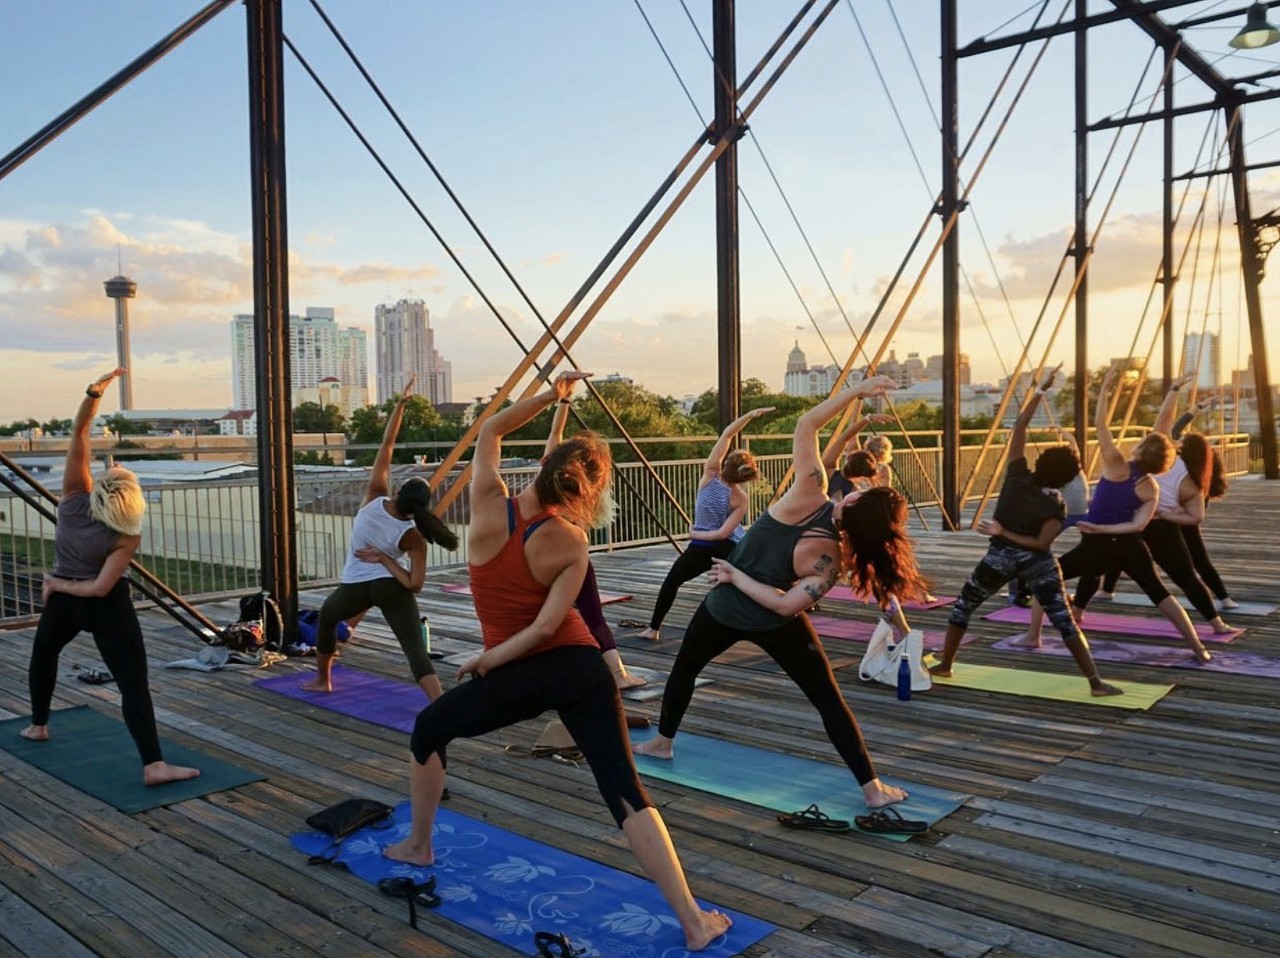 Take an outdoor yoga class with Mobile OmVarious Locations, mobileomtx.com Mobile Om’s motto is “yoga without bounds,” and in practice, it’s just like it sounds — mobile yoga classes in unconventional outdoor spaces. One of those boundless studios is on top of the Hays Street Bridge overlooking the downtown skyline, where Mobile Om got its start, but the roving studio offers classes at other classic SA locations including Confluence Park and the Mission Marquee Plaza.